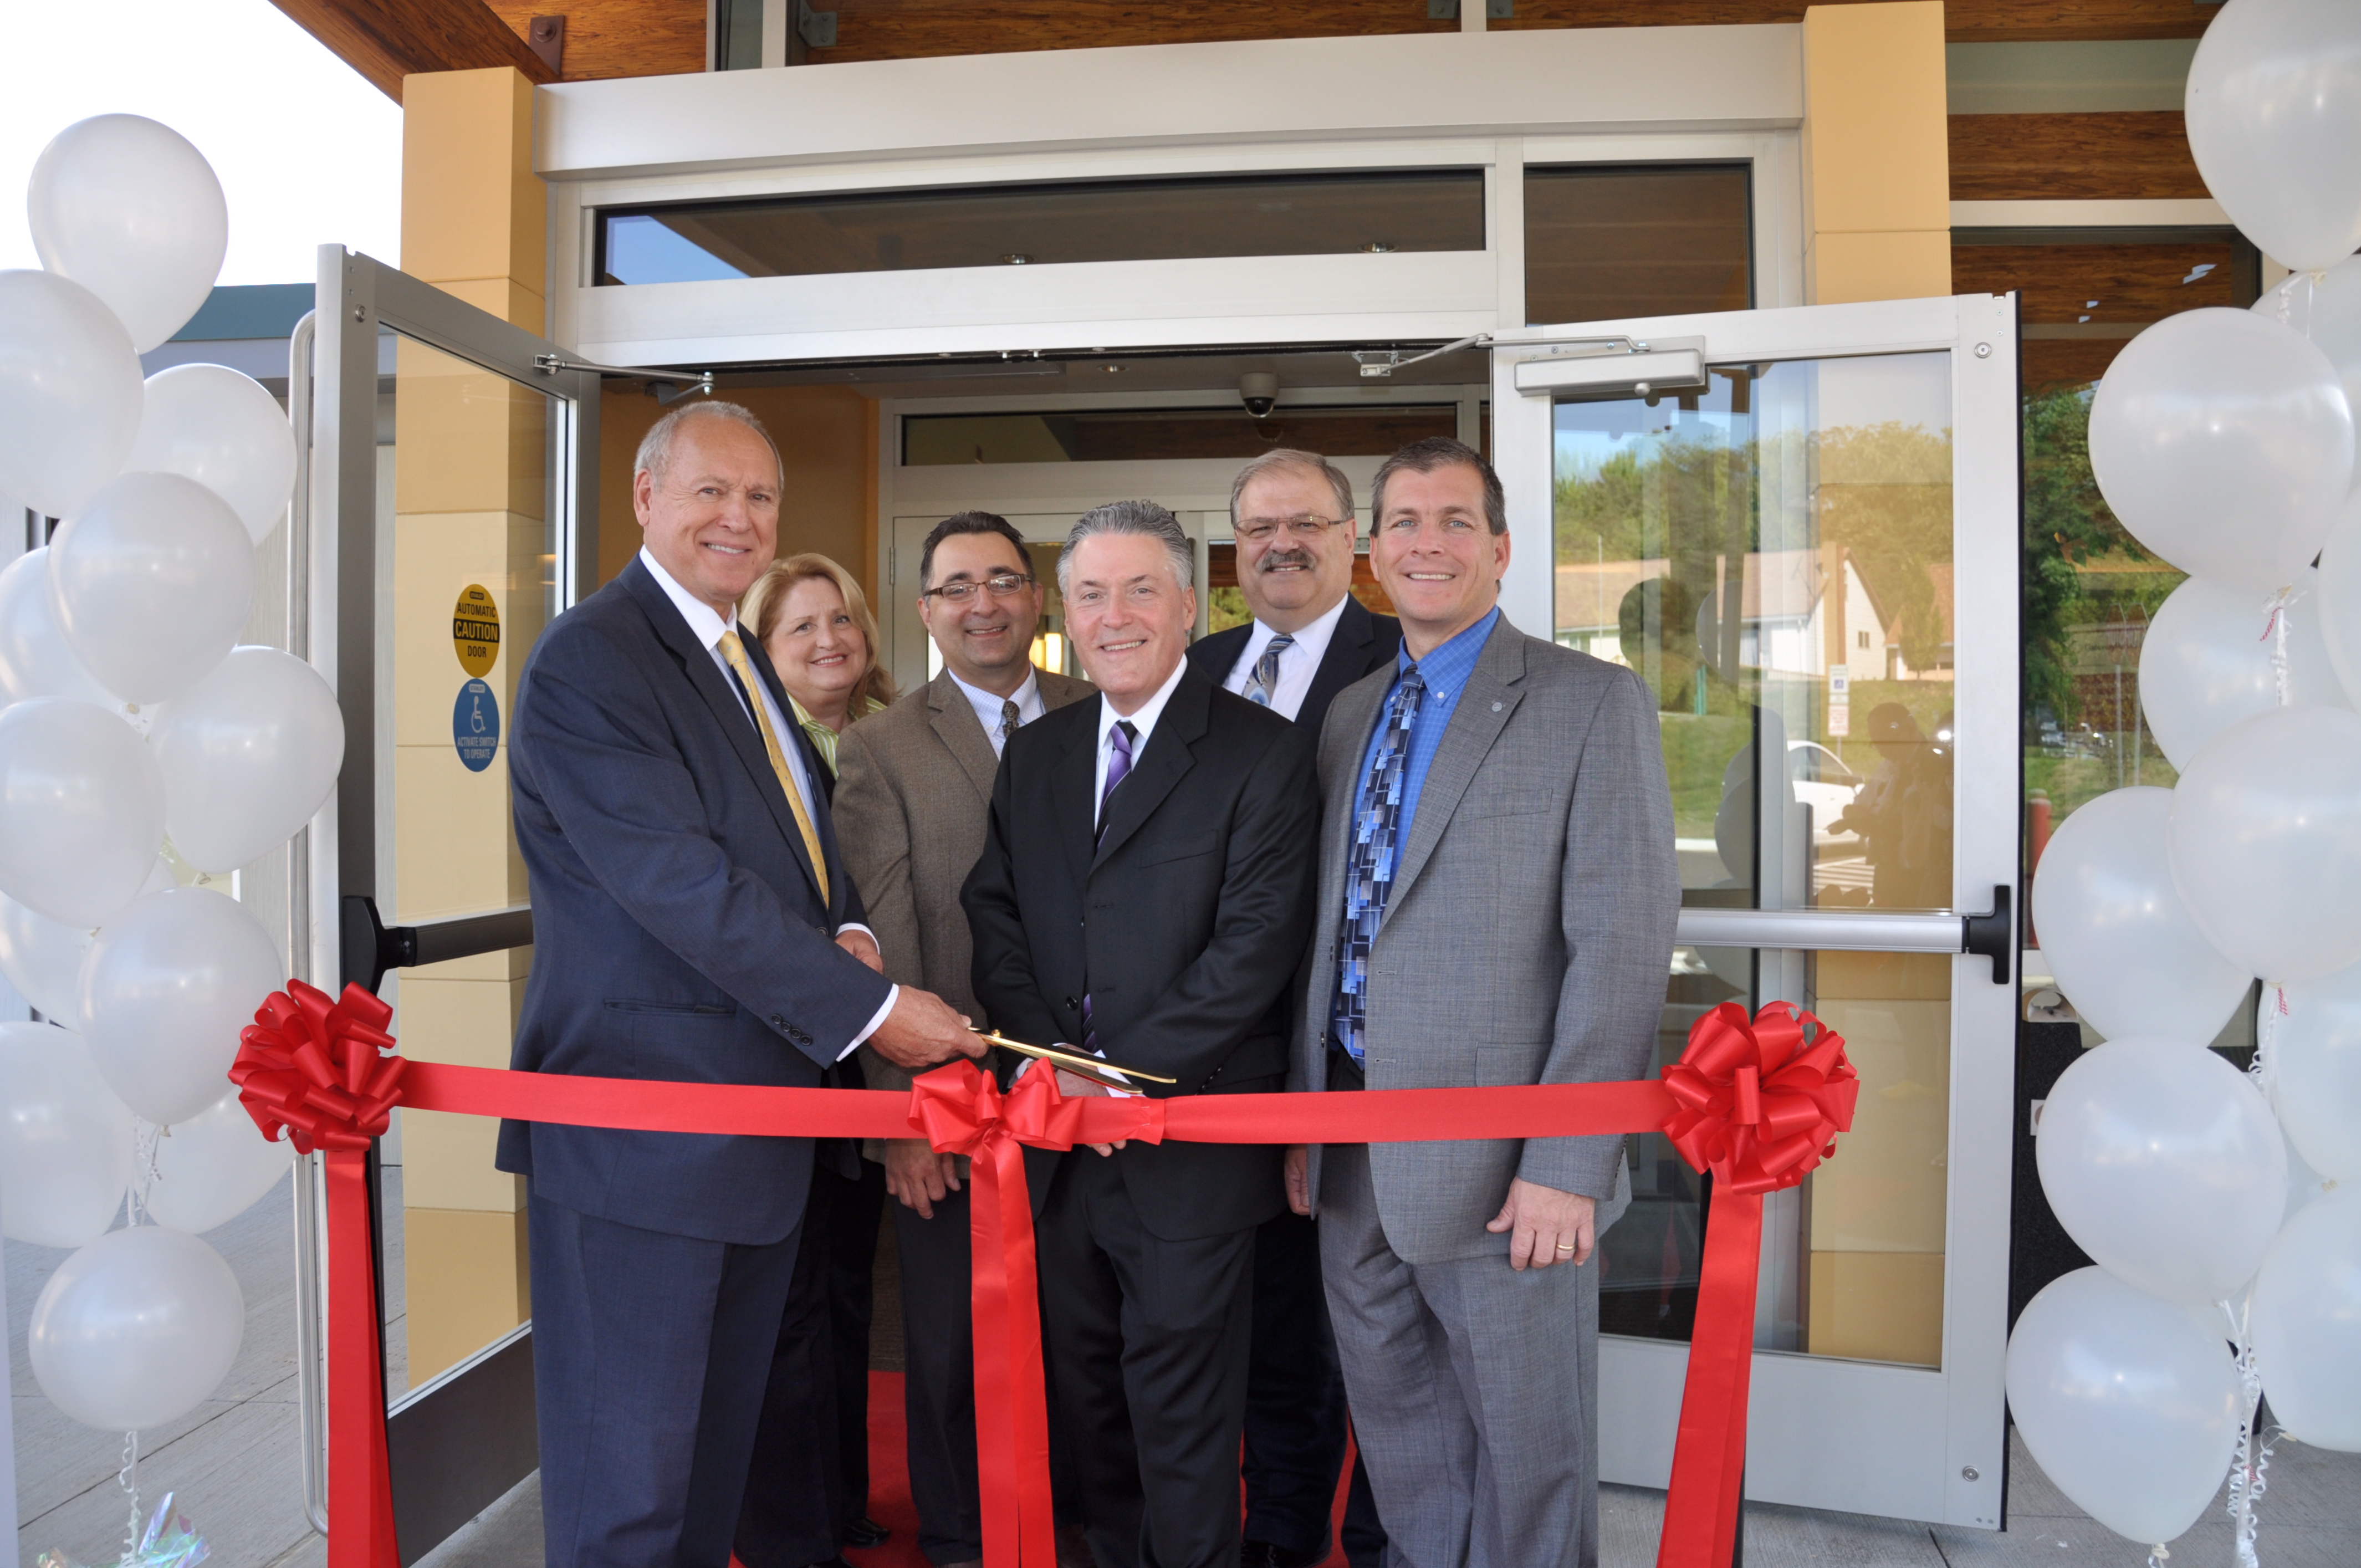 Executives cut the ribbon at the new Youth Services Center in Center Township, PA